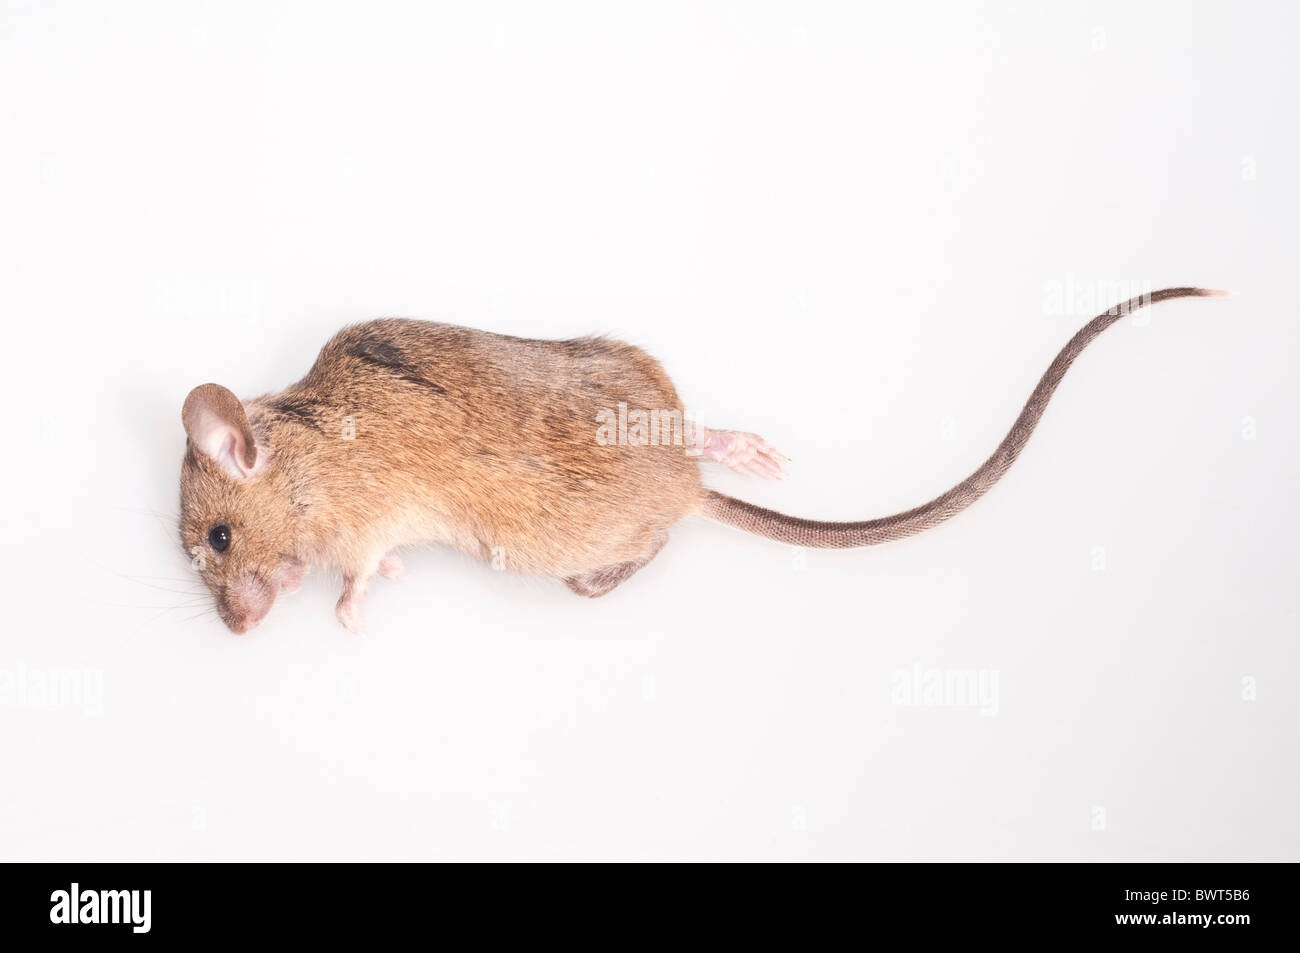 Dead house mouse, Mus musculus; cutout with white background Stock Photo